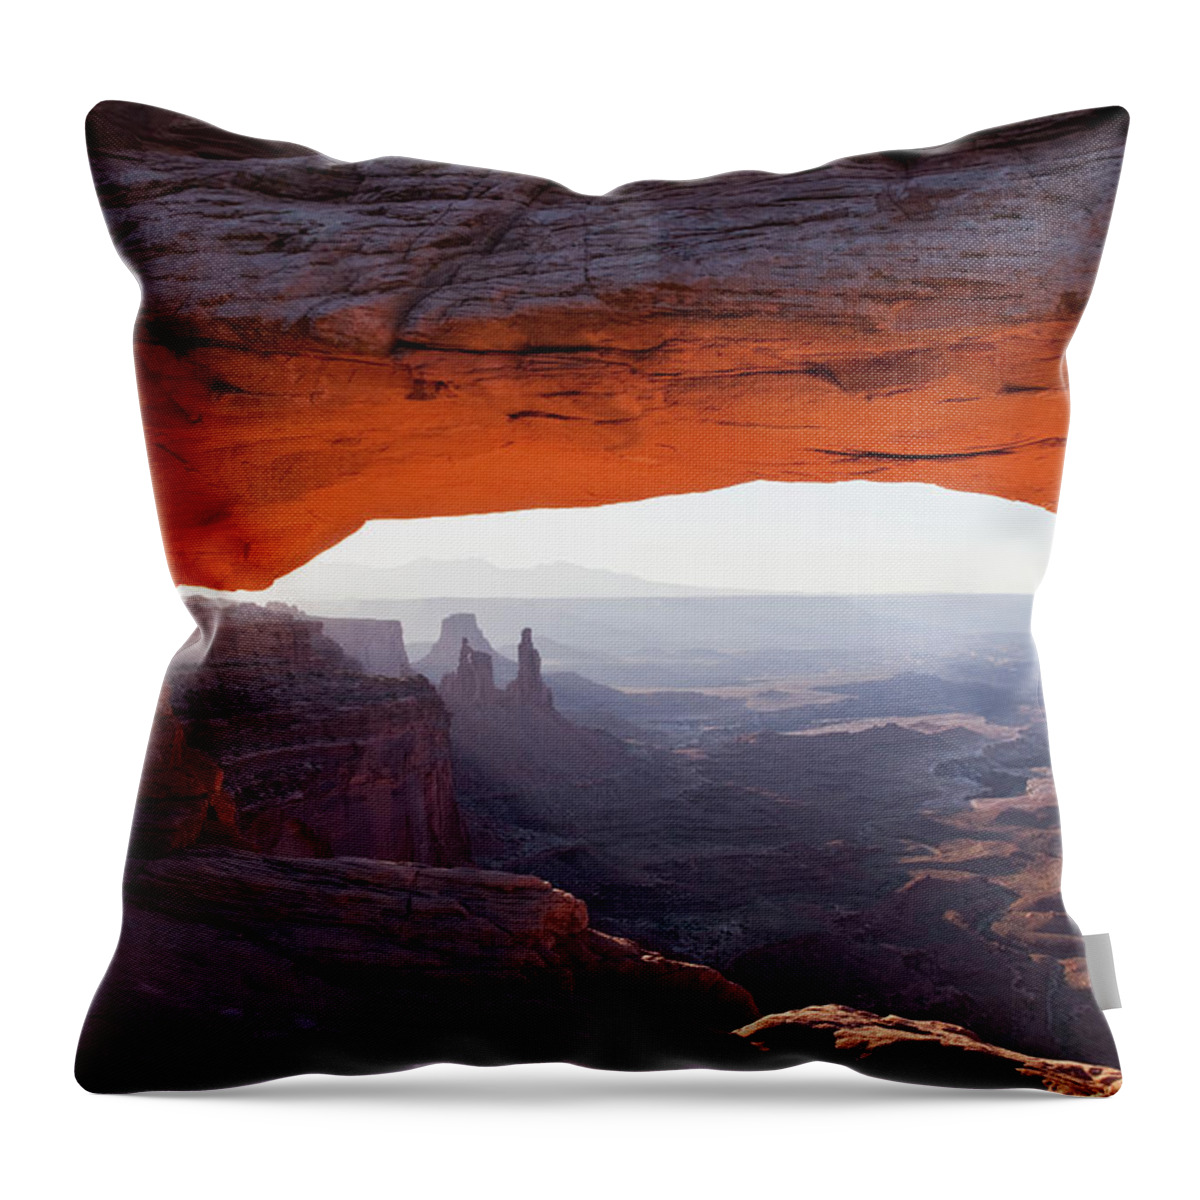 Orange Color Throw Pillow featuring the photograph The Lower Arch Glows A Brilliant Orange by William Tang / Design Pics